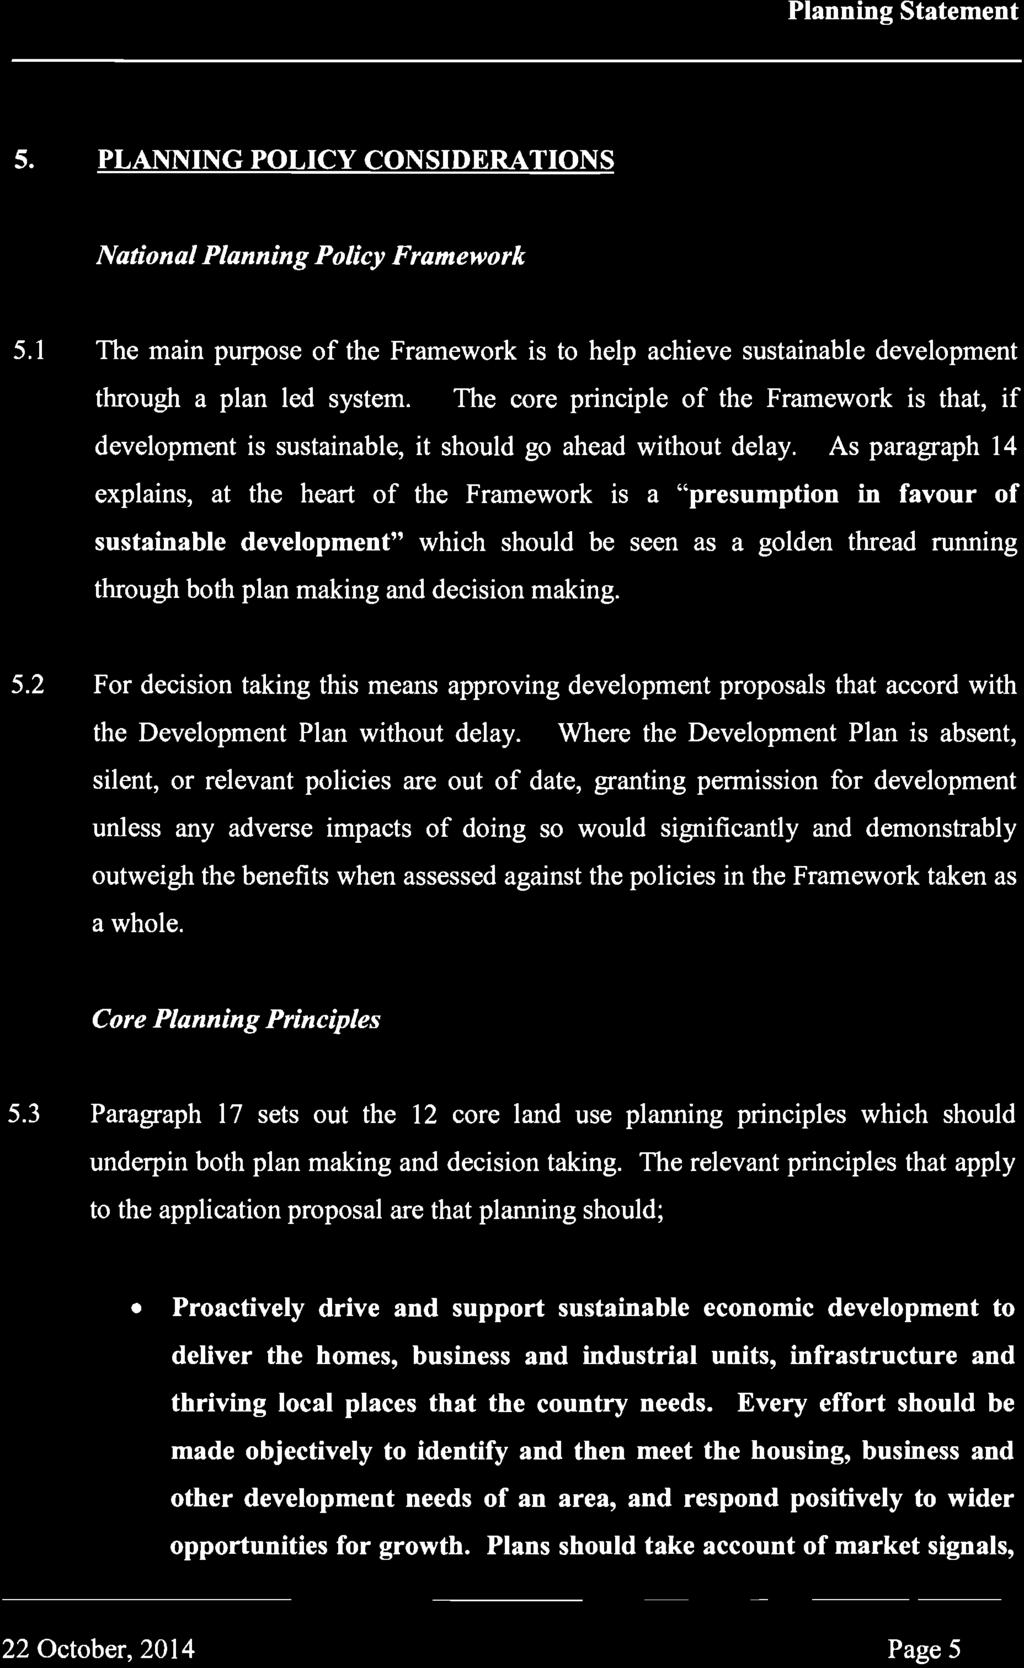 As paragraph 14 explains, at the heart of the Framework is a "presumption in favour of sustainable development" which should be seen as a golden thread running through both plan making and decision